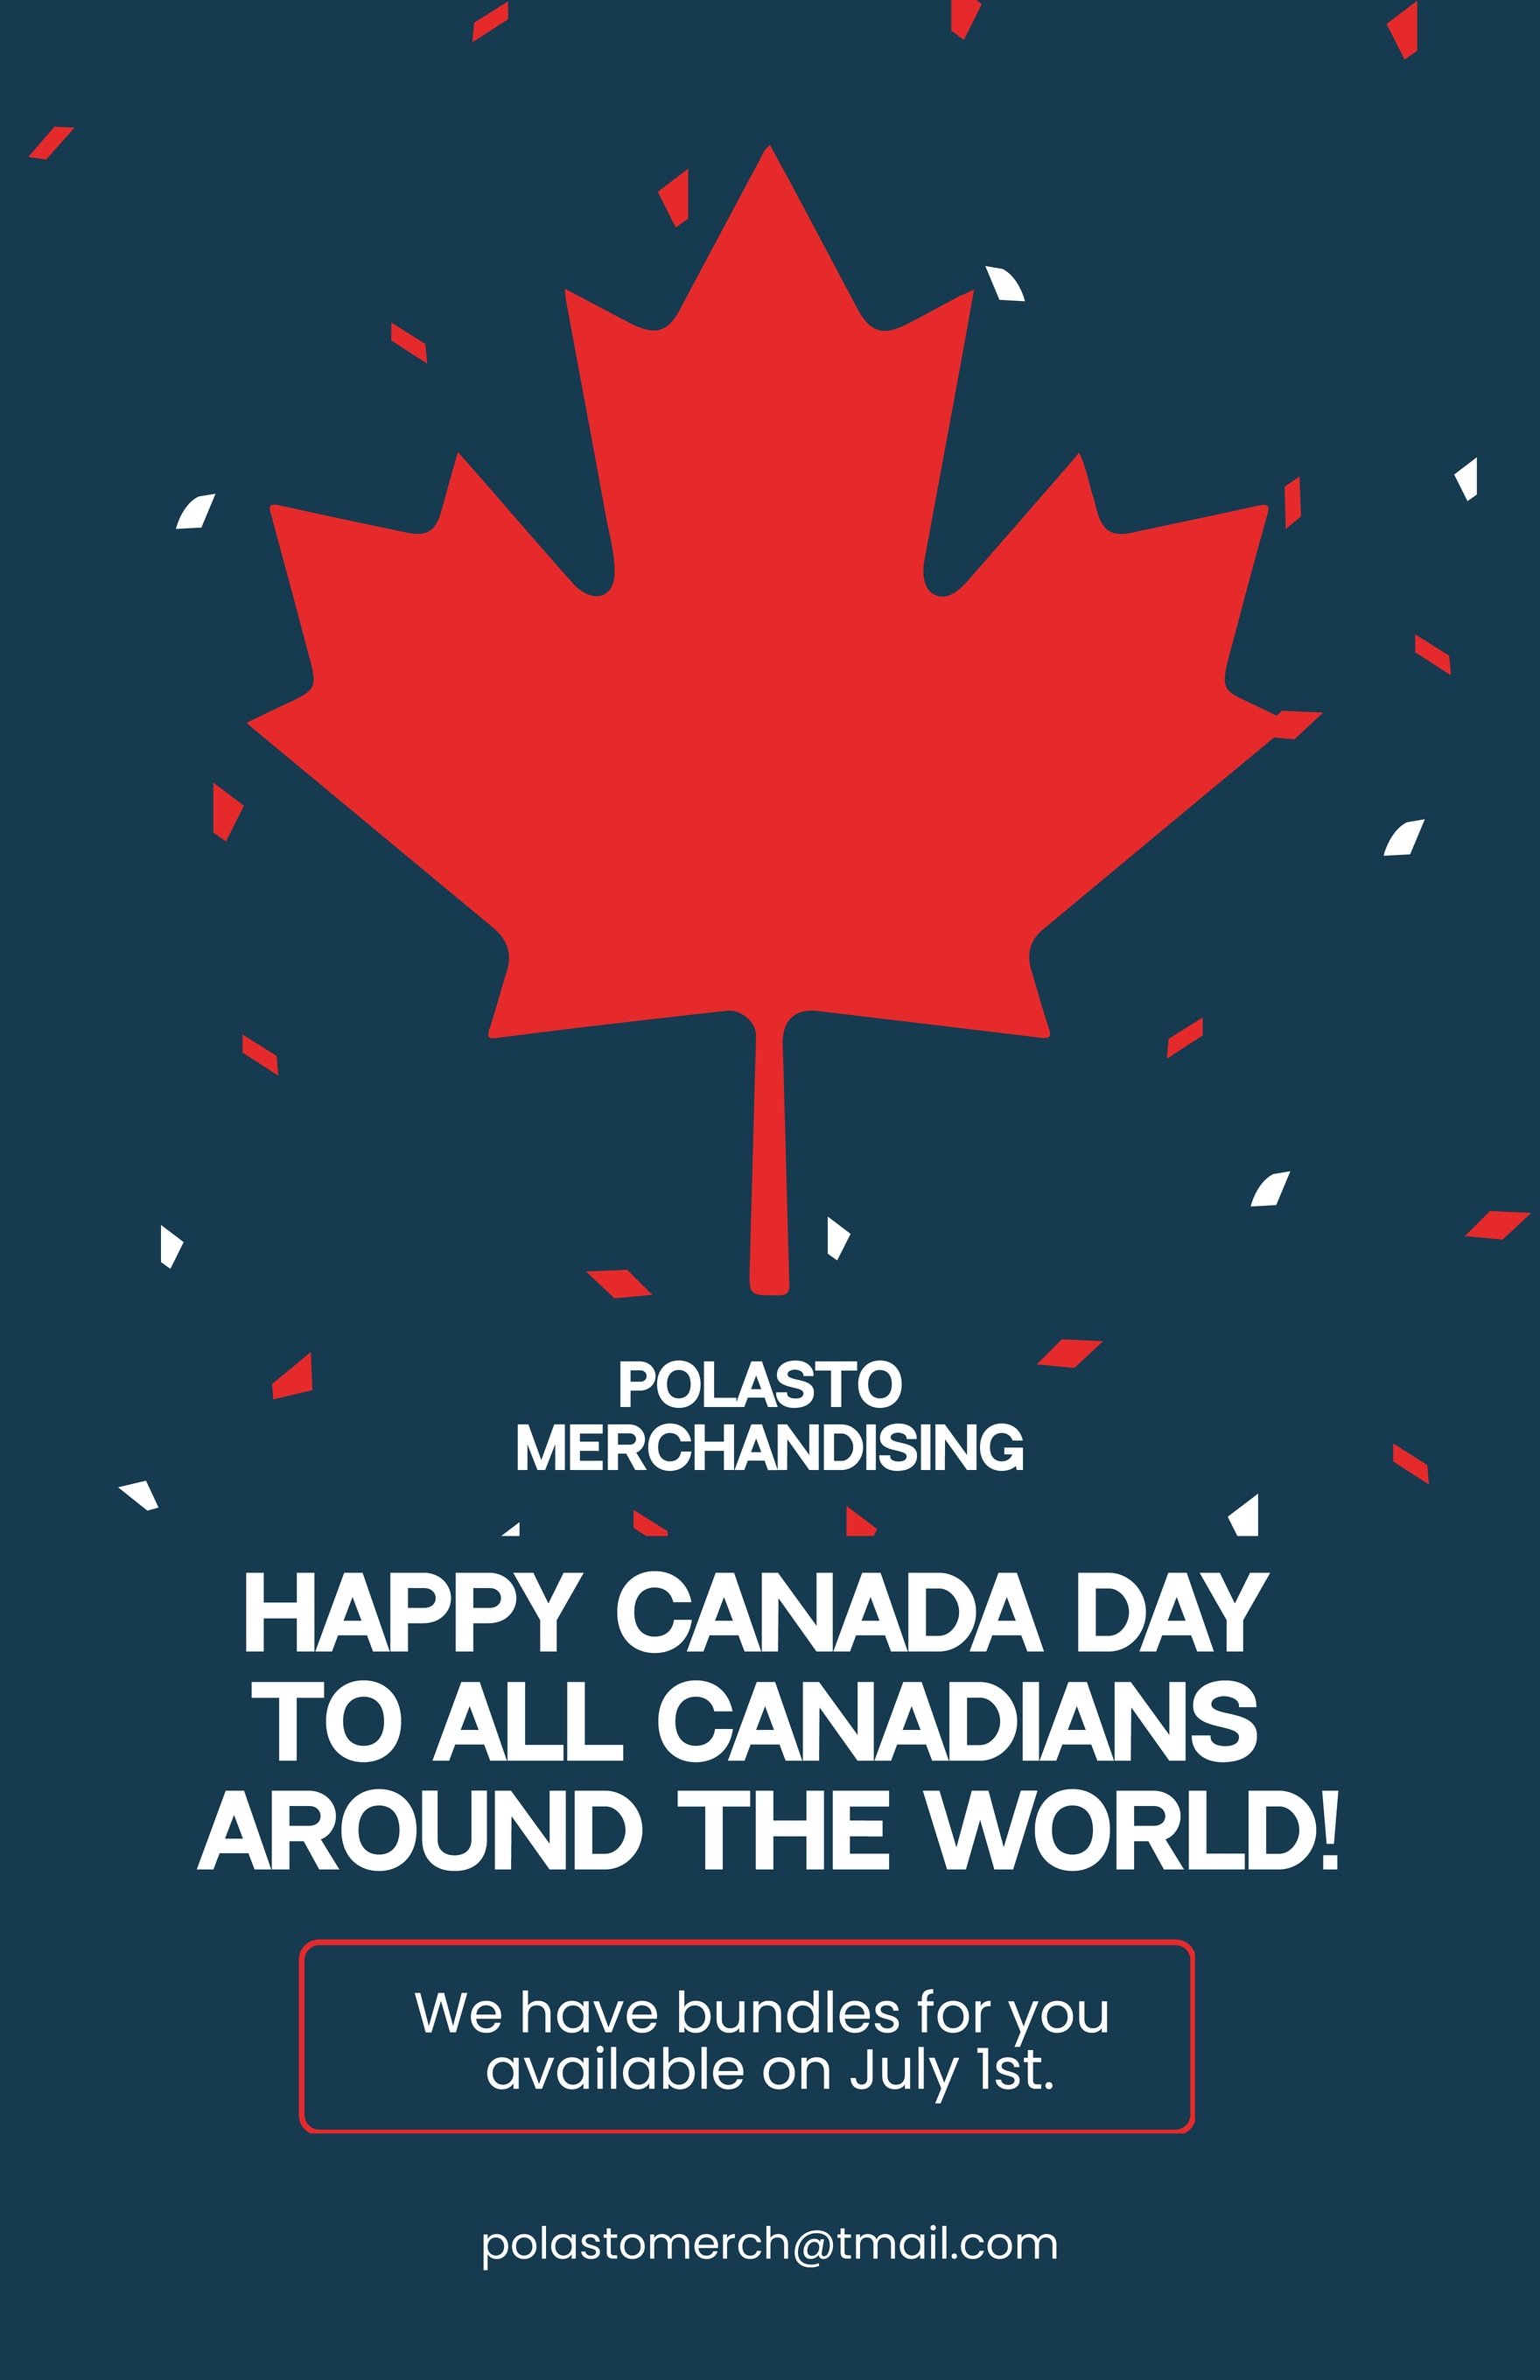 Canada Day Ad Poster Template in Word, Google Docs, Illustrator, PSD, Publisher